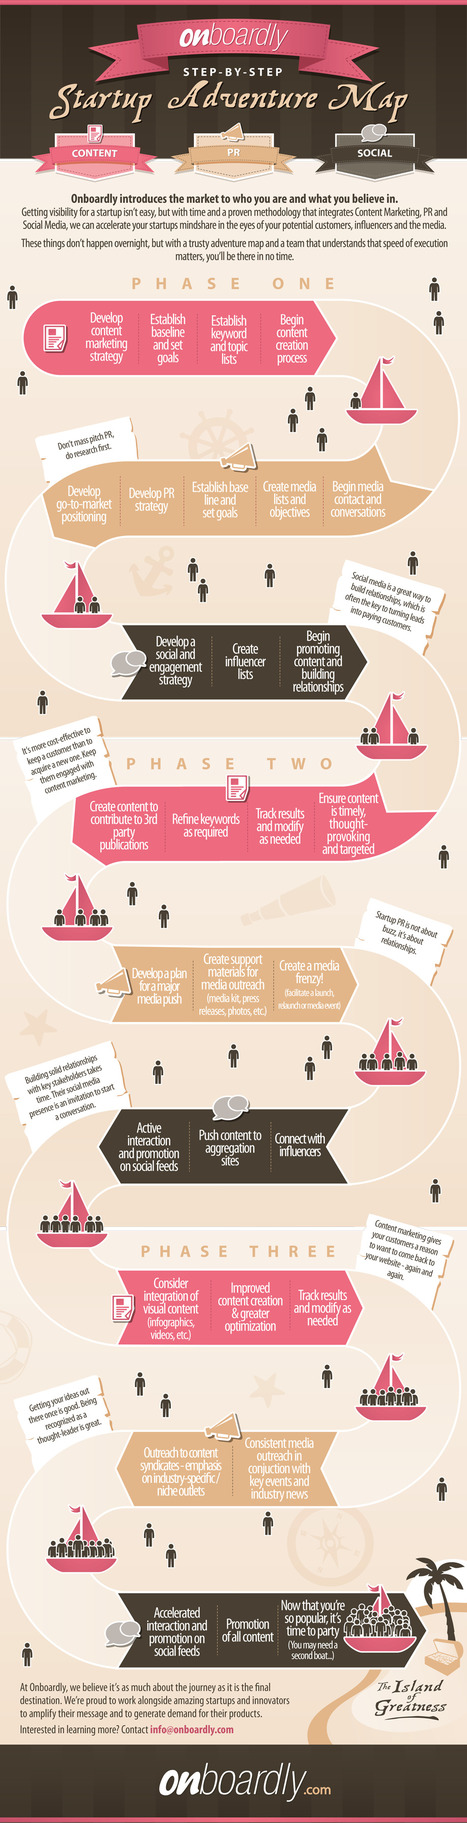 Steps On How to Acquire Customers For Your Startup [INFOGRAPHIC] | | Online tips & social media nieuws | Scoop.it